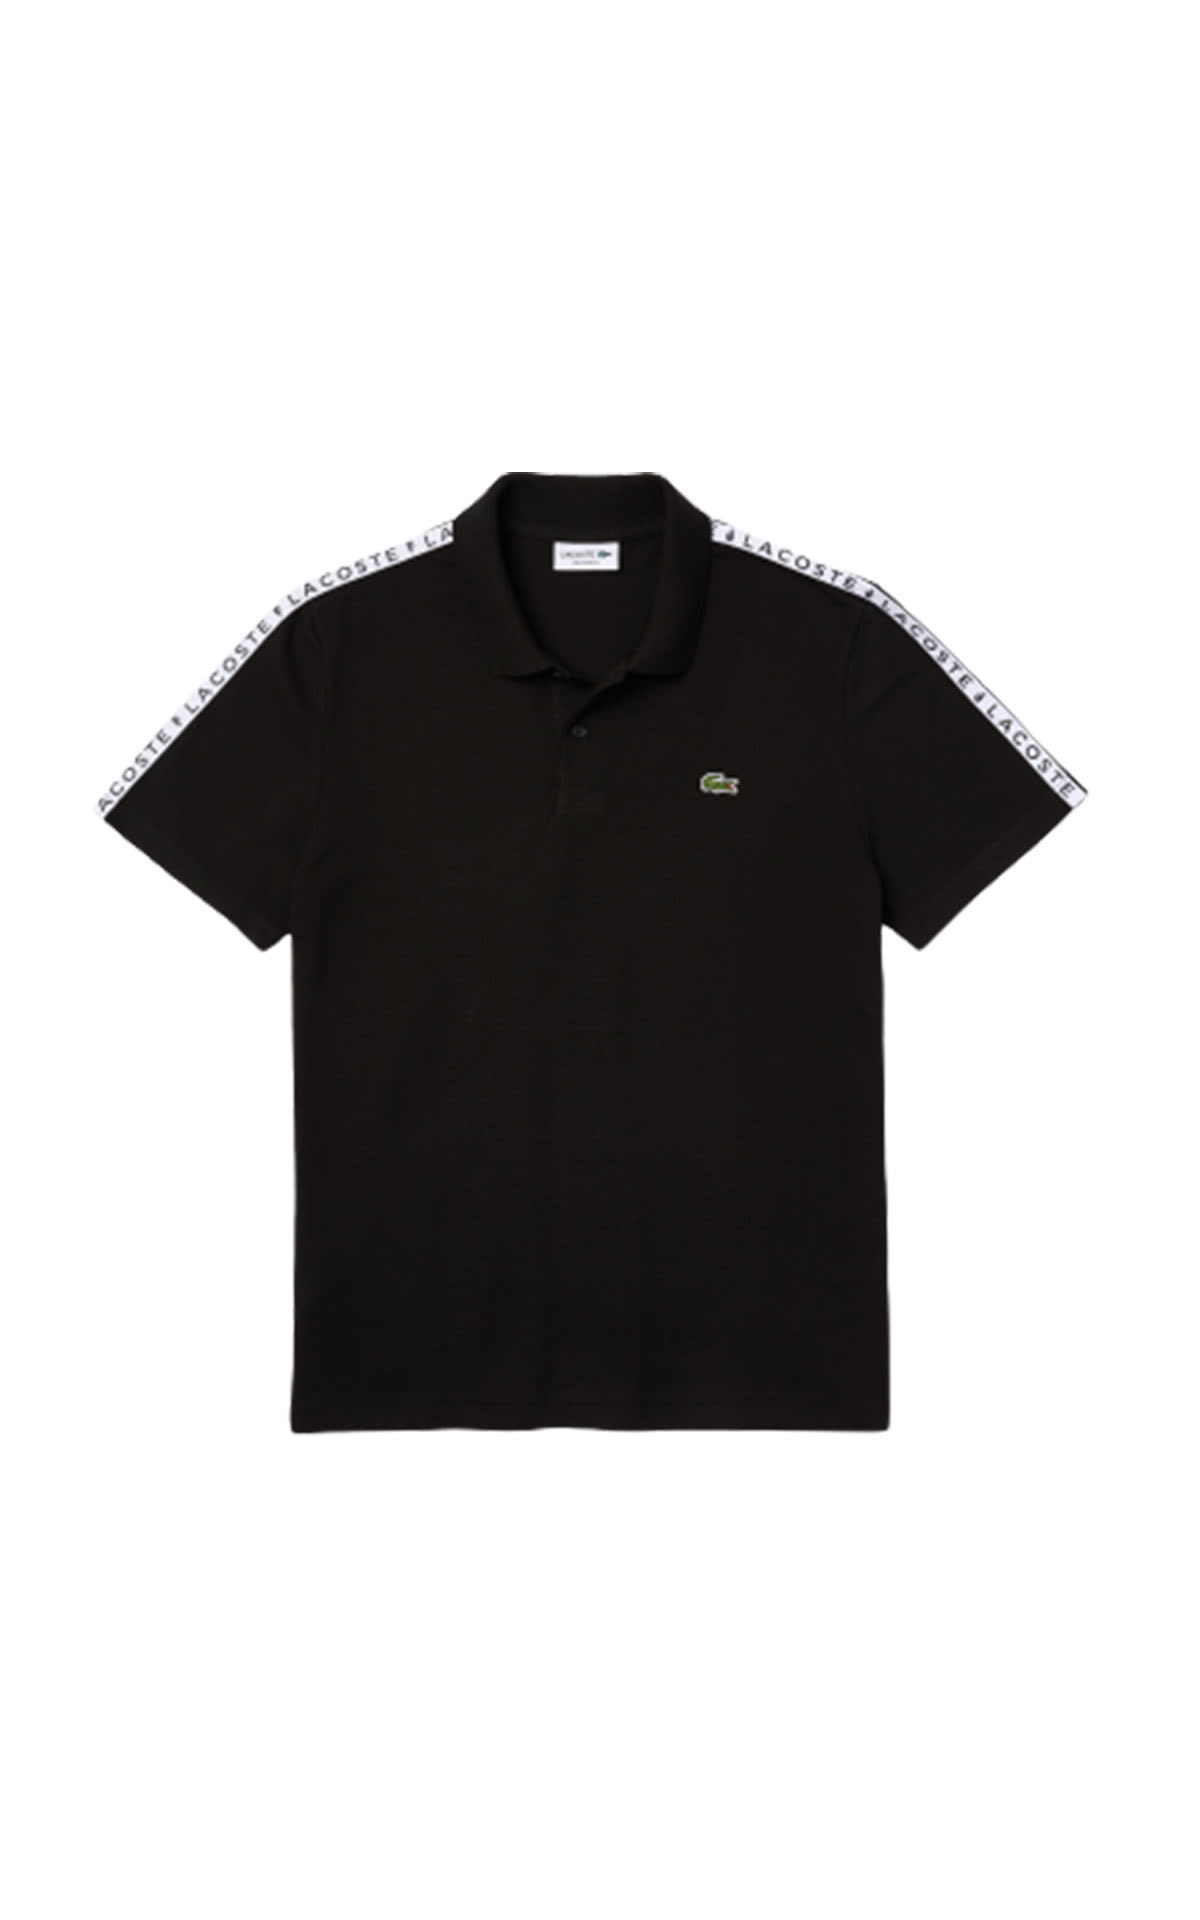 Lacoste Ultra-lightweight cotton regular fit polo shirt from Bicester Village